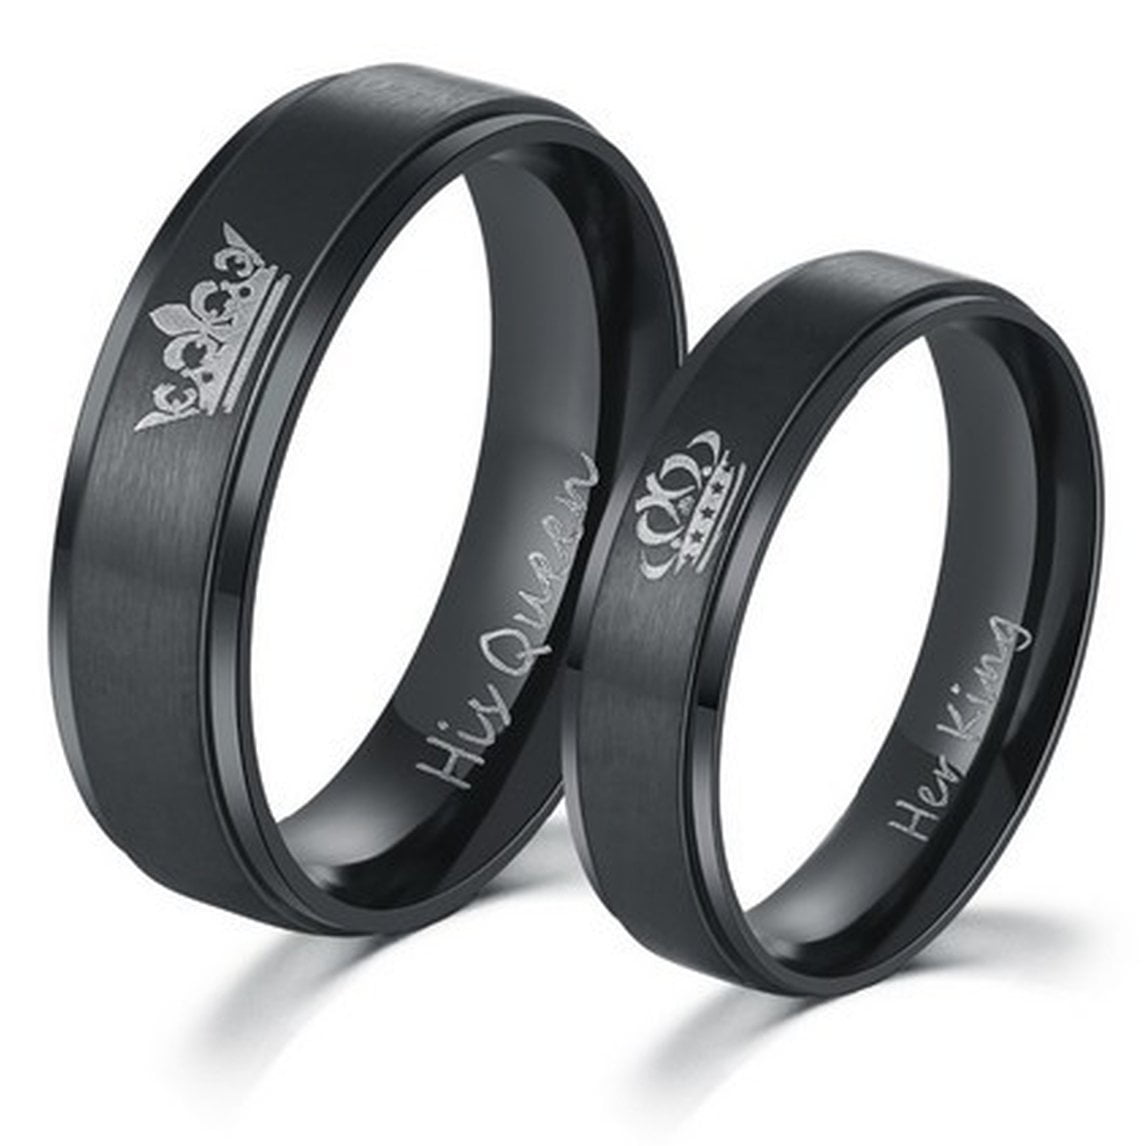 King and Queen Rings, His & Hers Stainless Steel Rings, Anniversary Rings-SSR556  | eBay